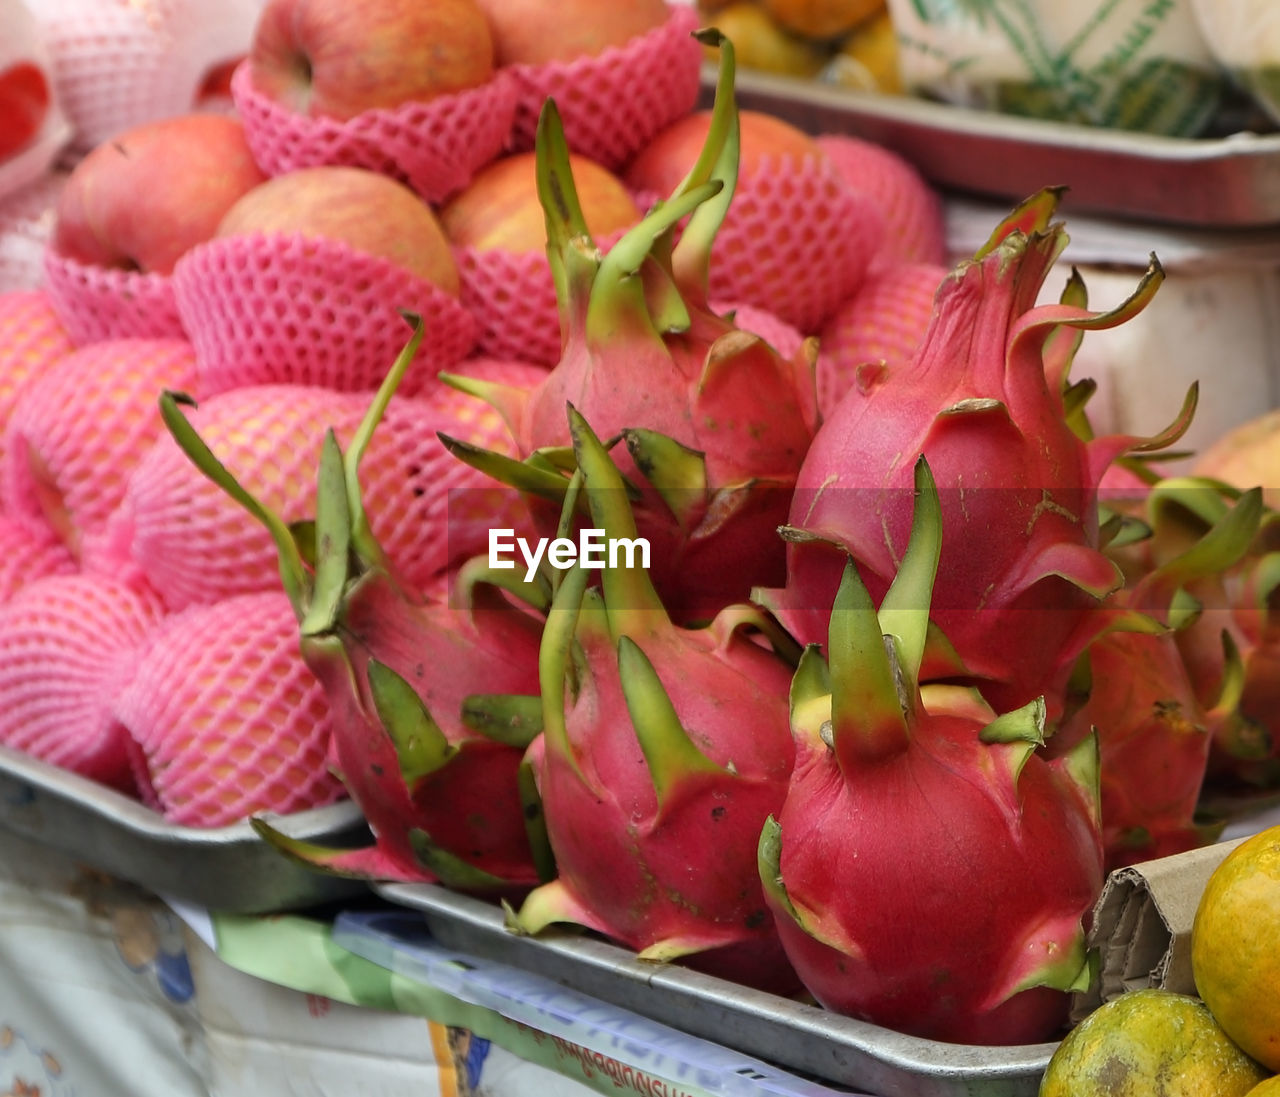 HIGH ANGLE VIEW OF FRUITS FOR SALE IN MARKET STALL